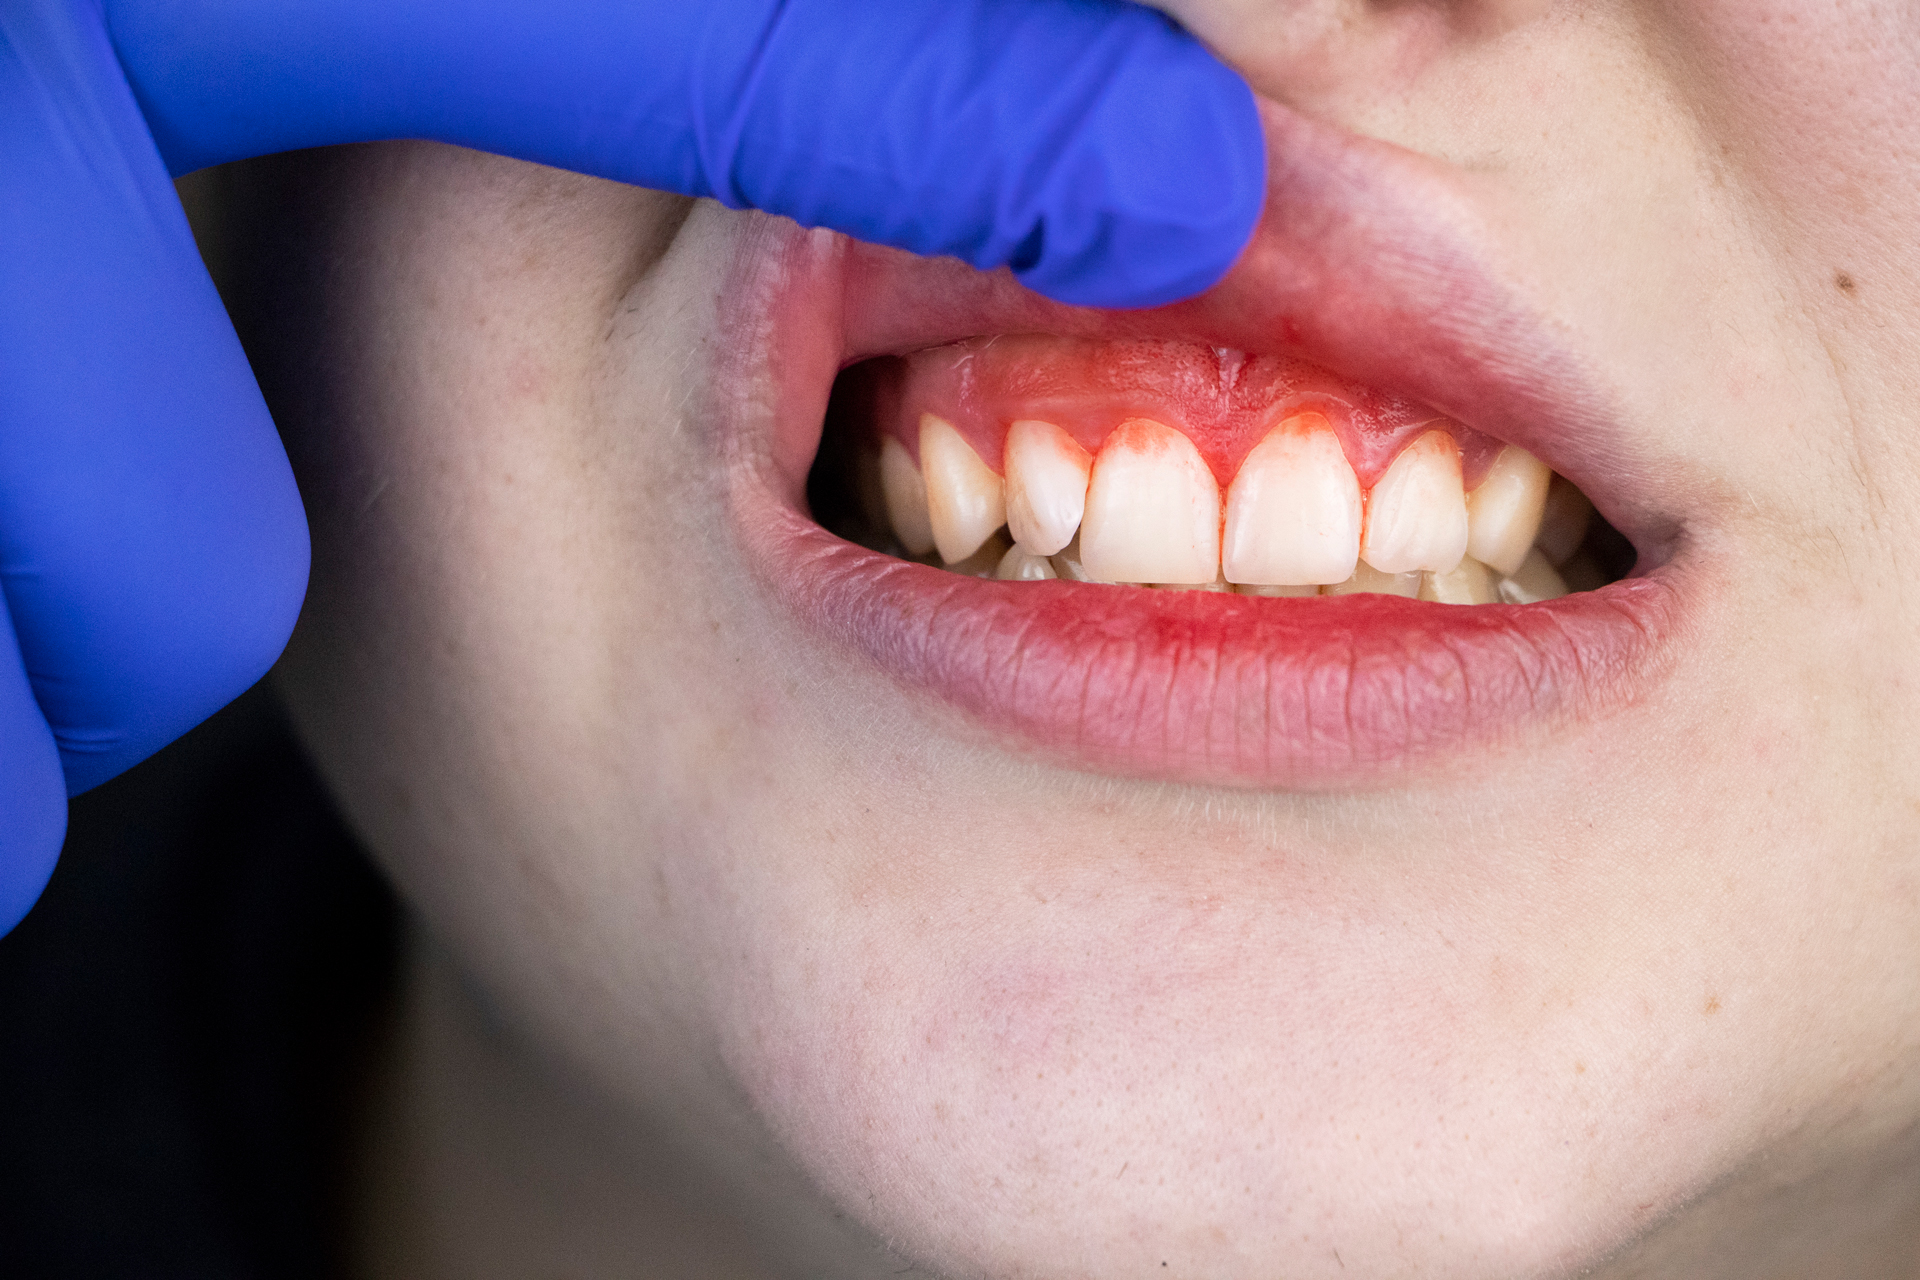 What Is Gum Disease? And How Can I Prevent It?